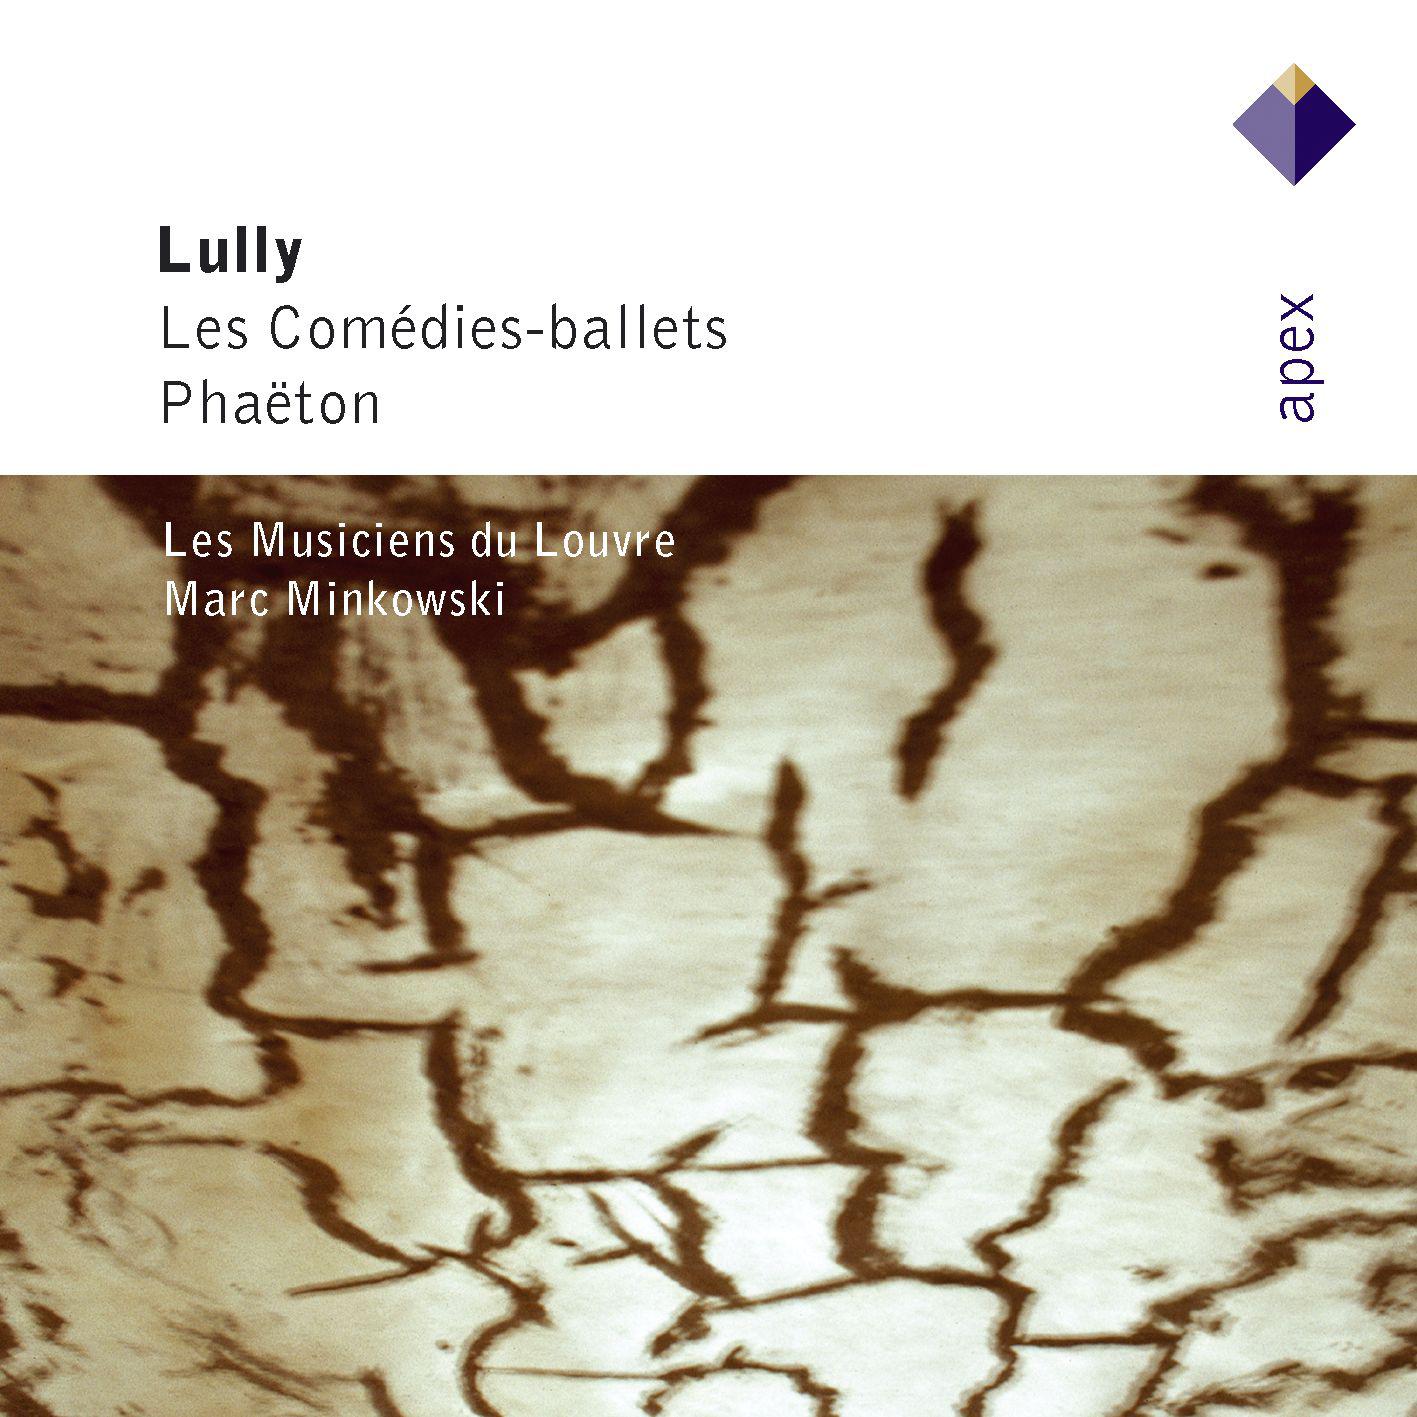 Lully:Pastoral comique